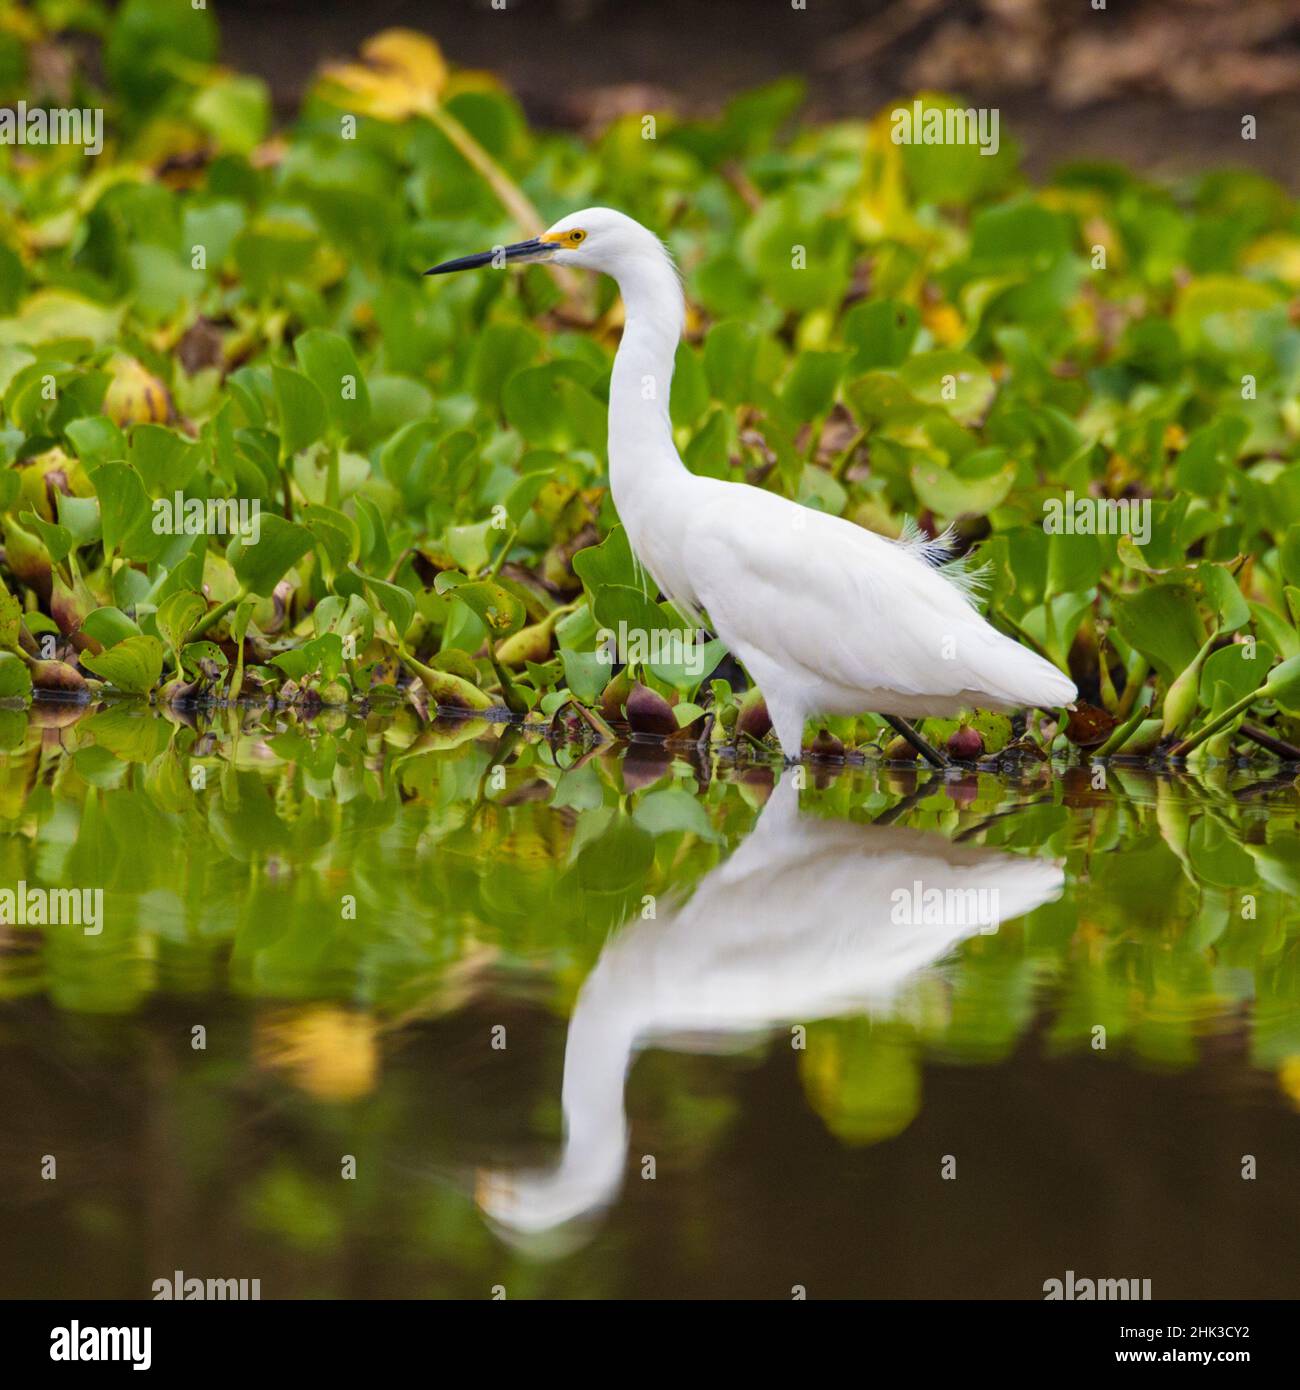 South America. Brazil. A Snowy egret (Egretta thula),  is commonly found in the Pantanal, the world's largest tropical wetland area, and a UNESCO Worl Stock Photo